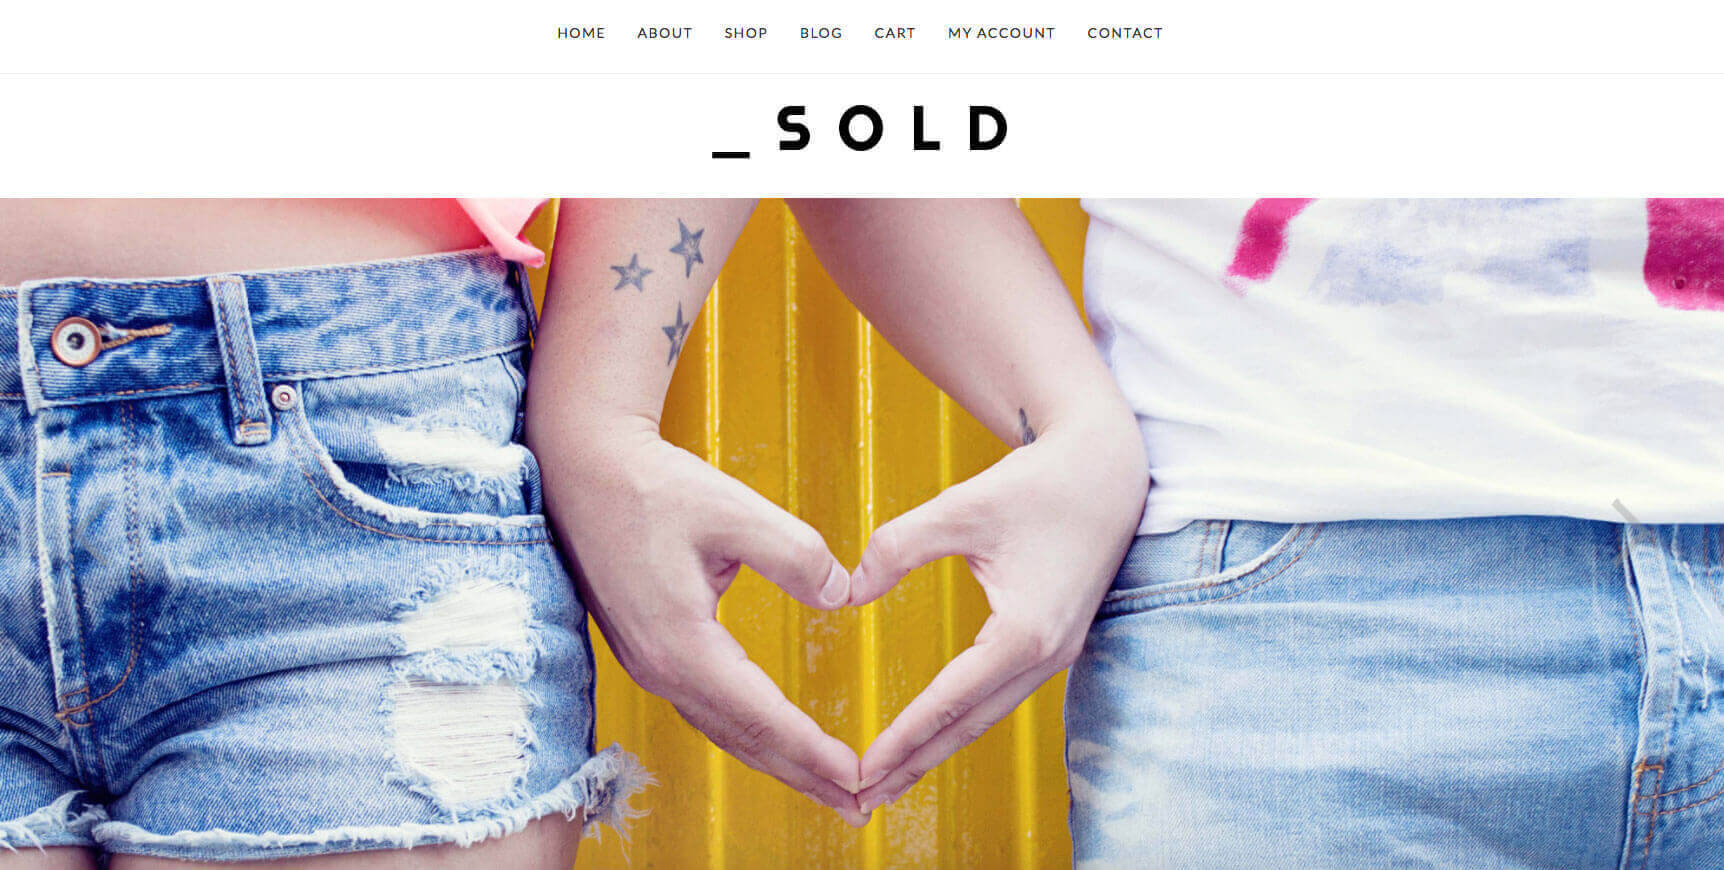 Sold theme